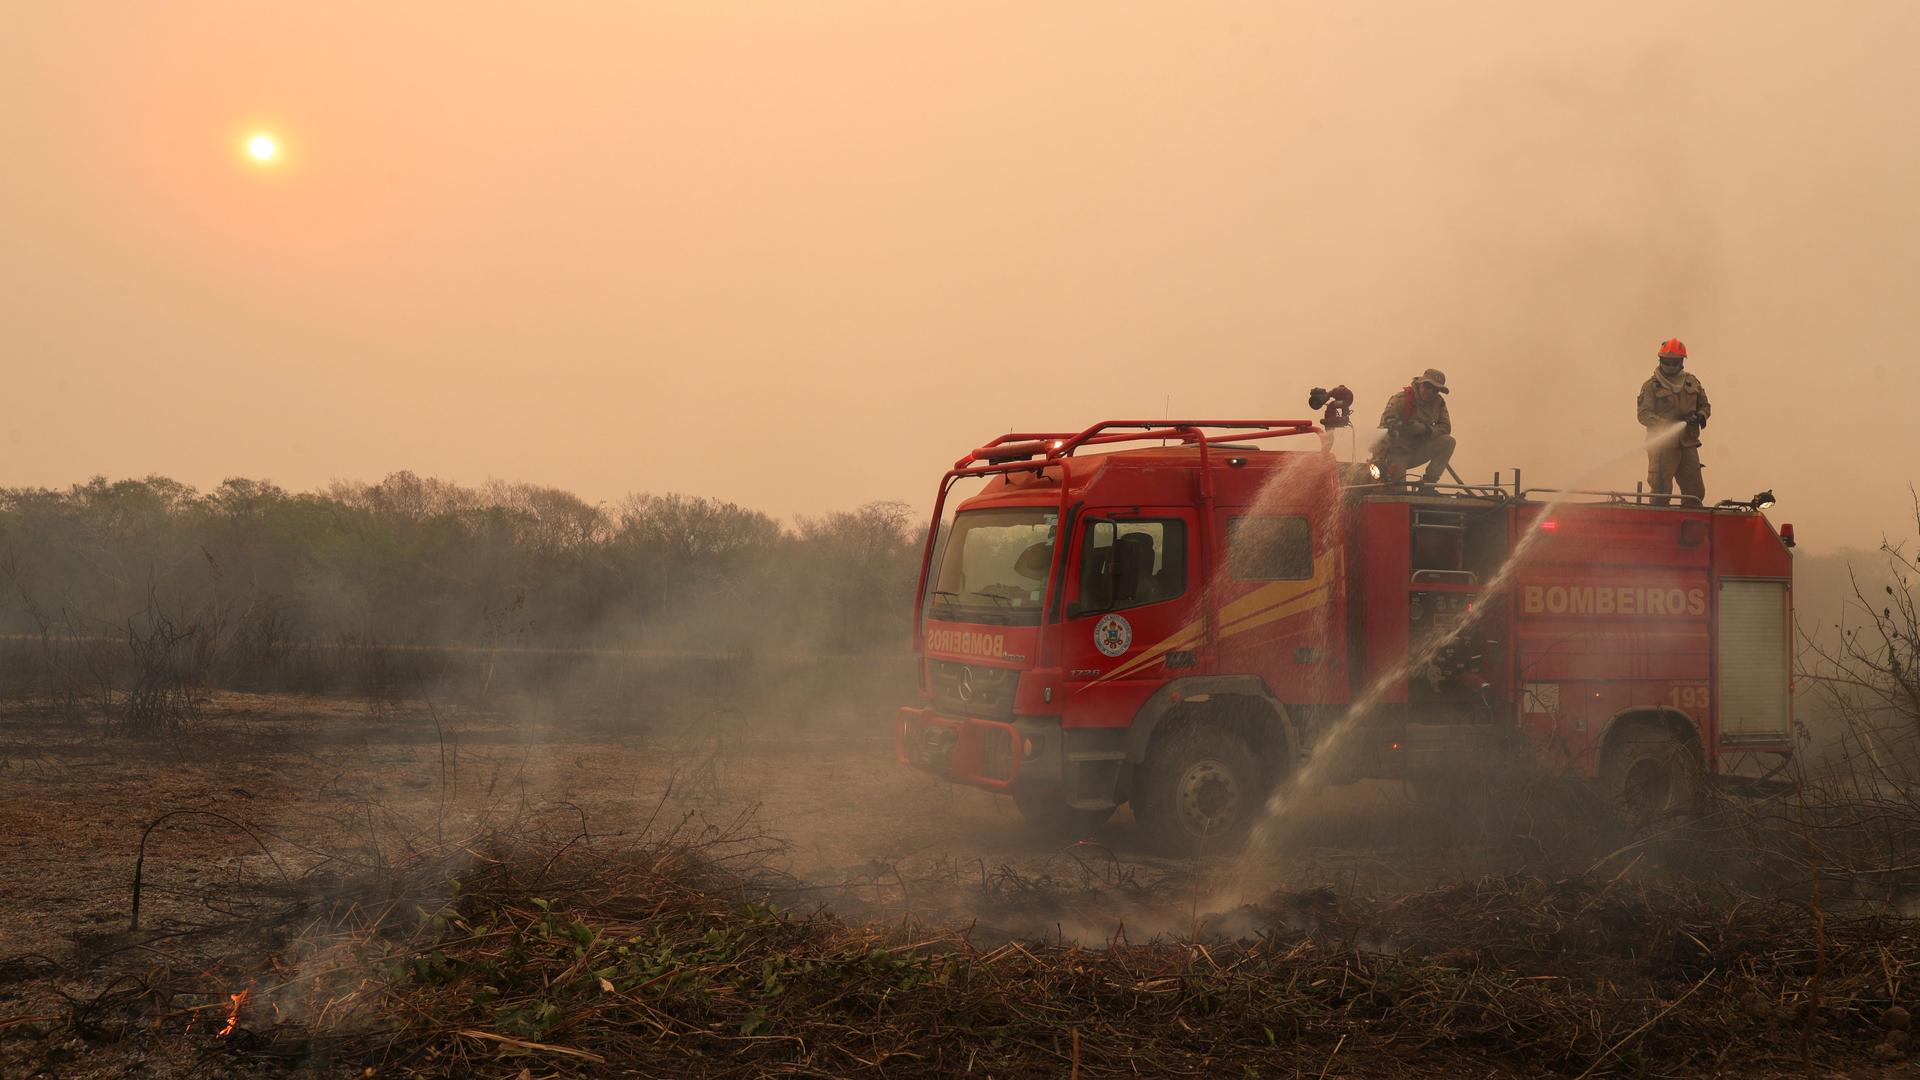 Firefighters work to extinguish a fire in a ranch amongst smoke in the Pantanal, the world's largest wetland, in Pocone, Mato Grosso state, Brazil, Aug. 28, 2020.  